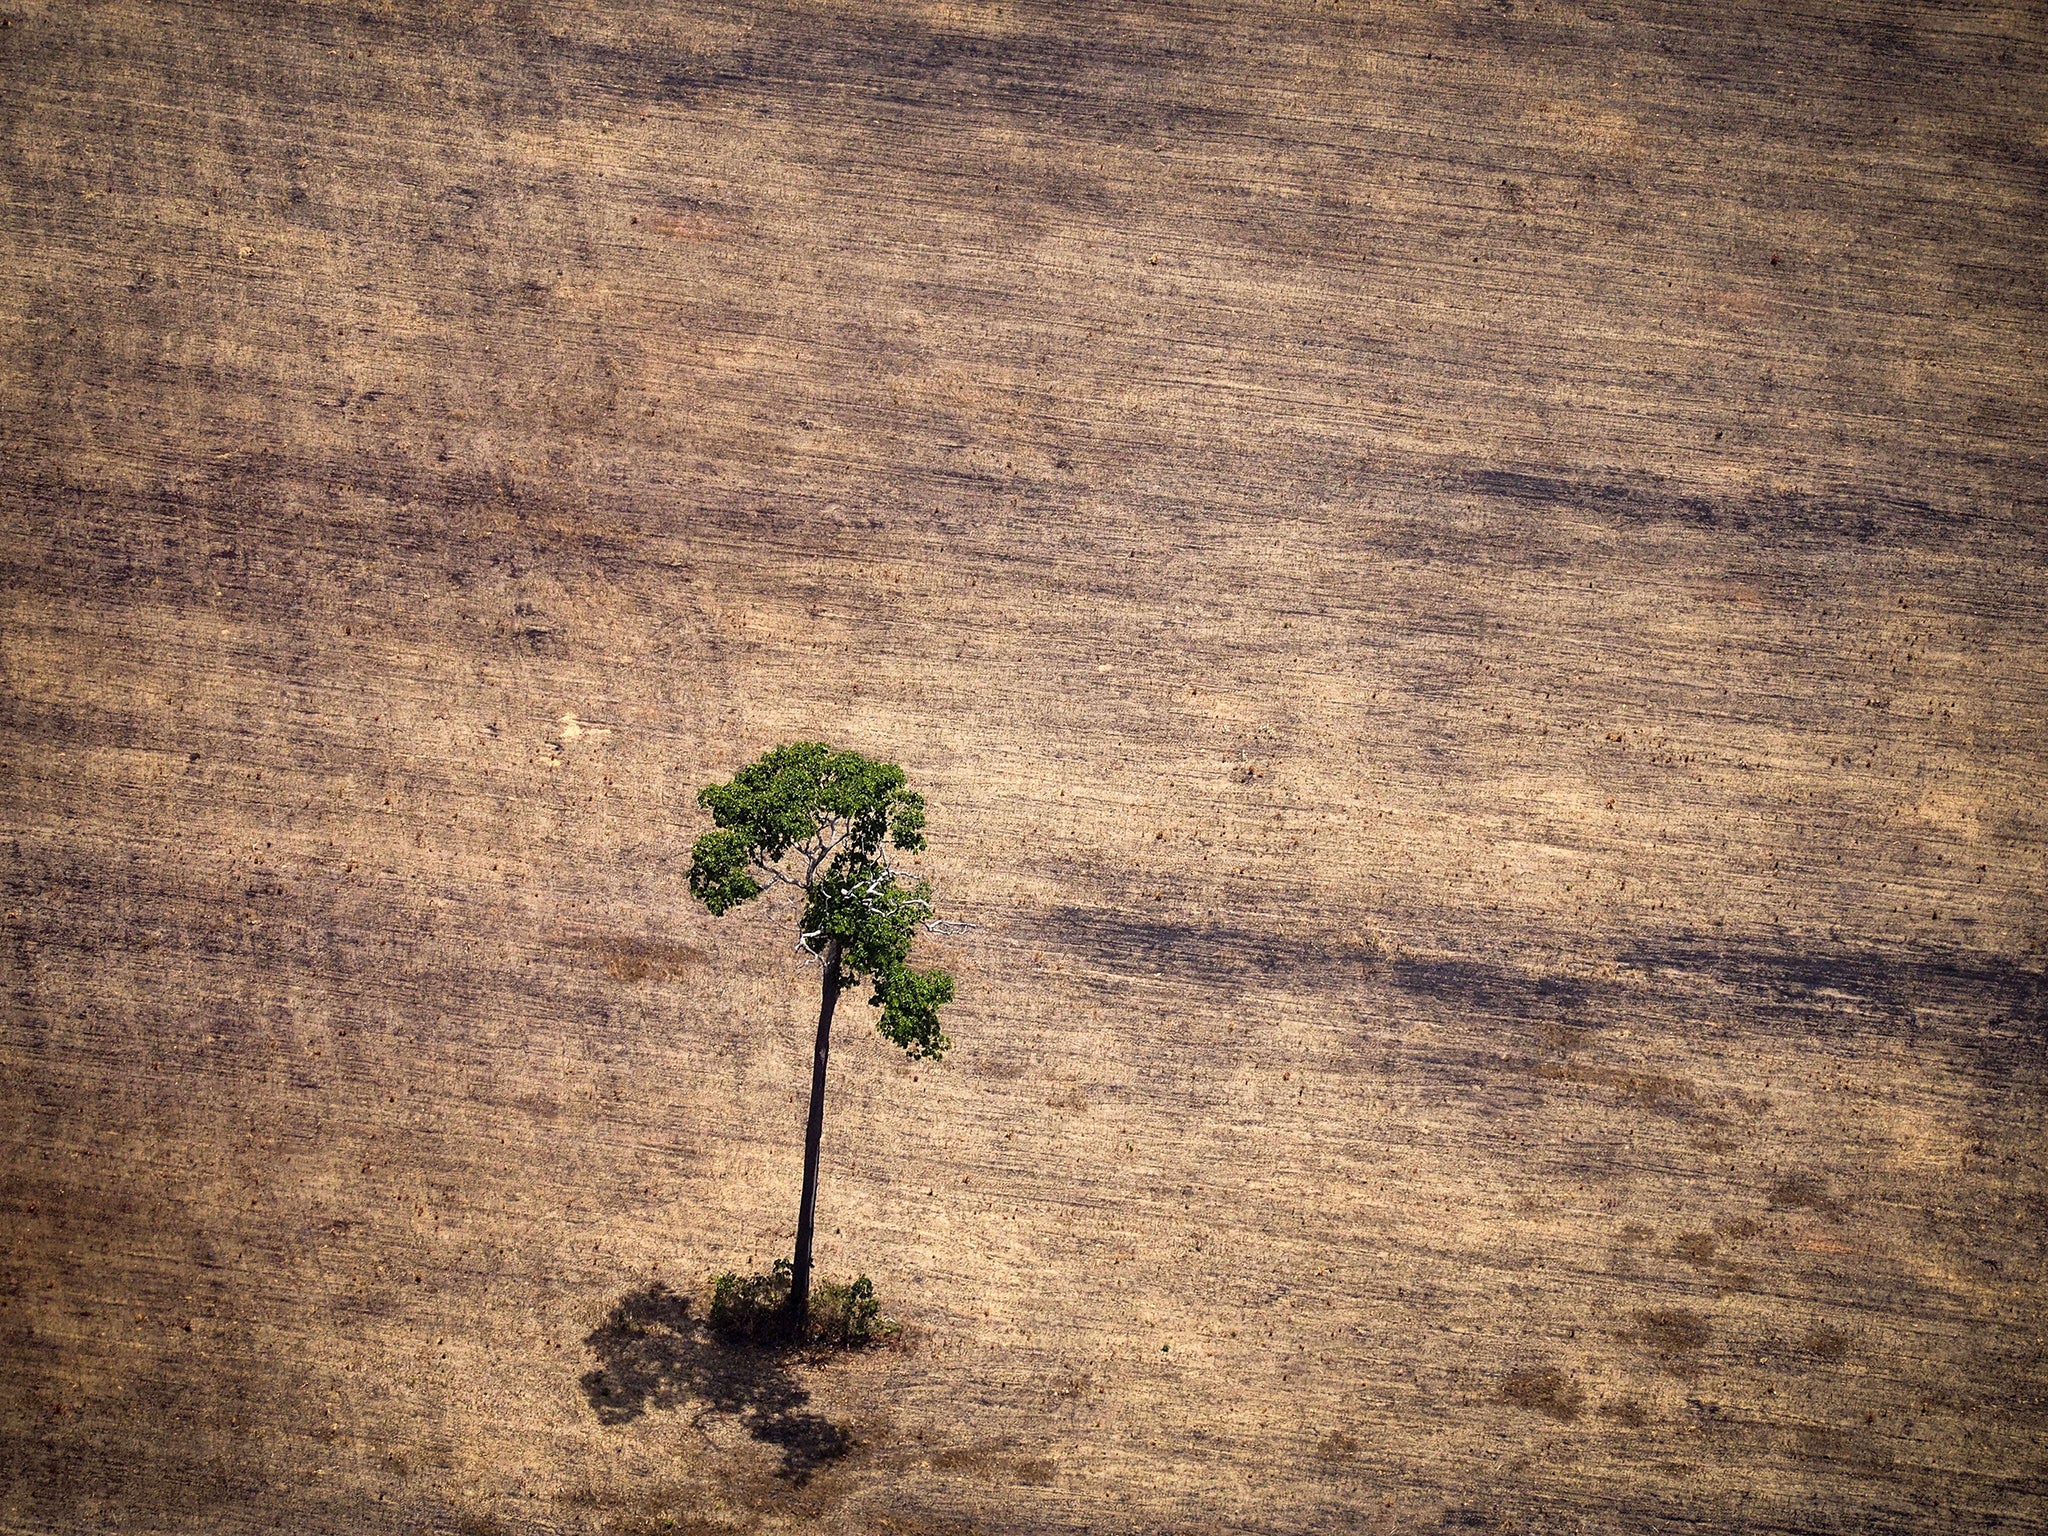 The sort of deforestation witnessed in the Amazonian rainforest may be at an end thanks to a switch in land use